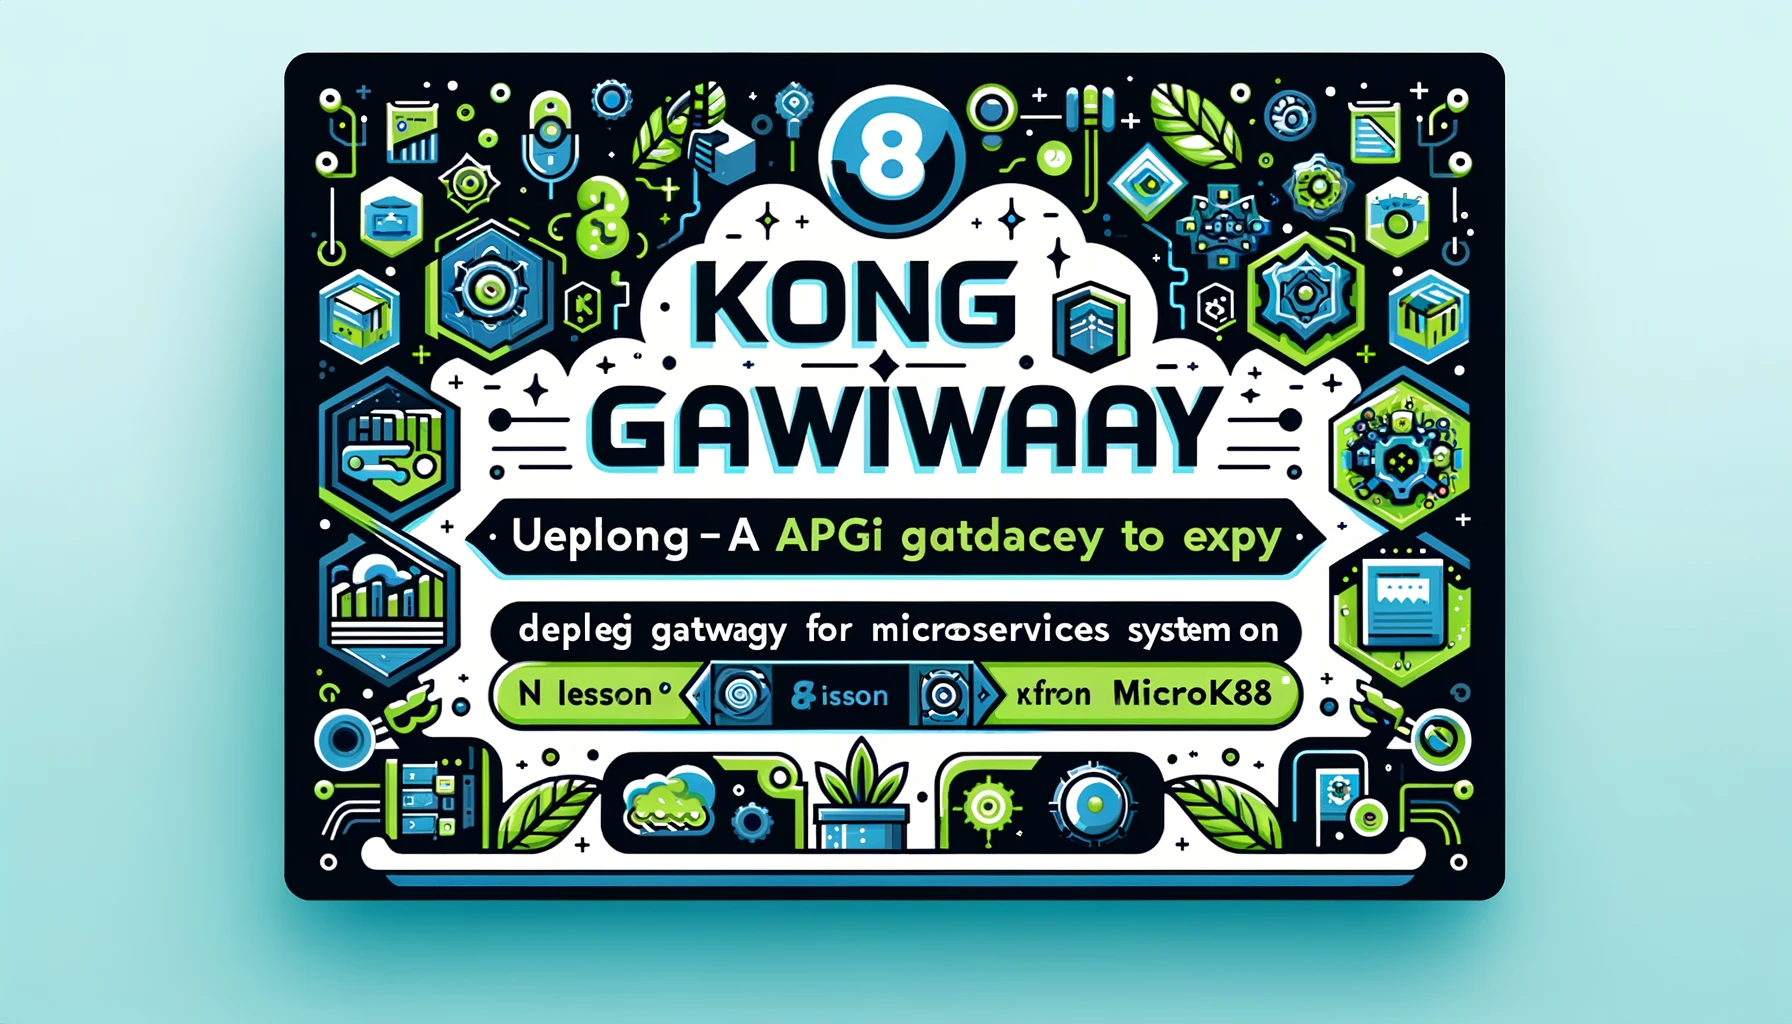 Lesson 7 - Using Kong Gateway to deploy API Gateway for Microservices system on Microk8s